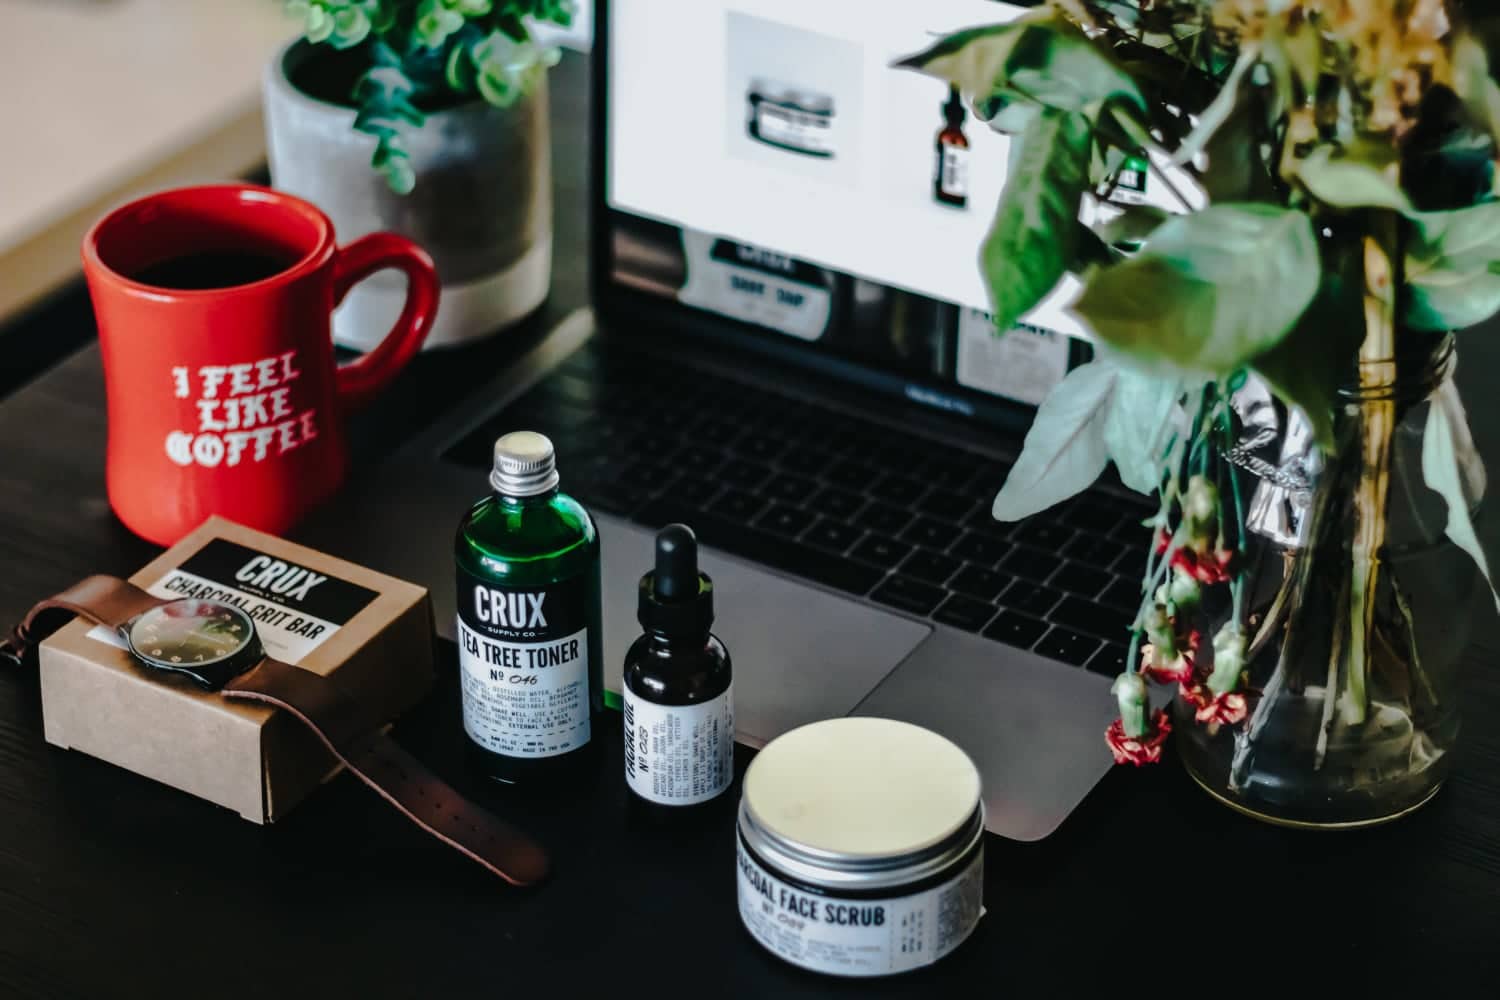 grooming products on a desk